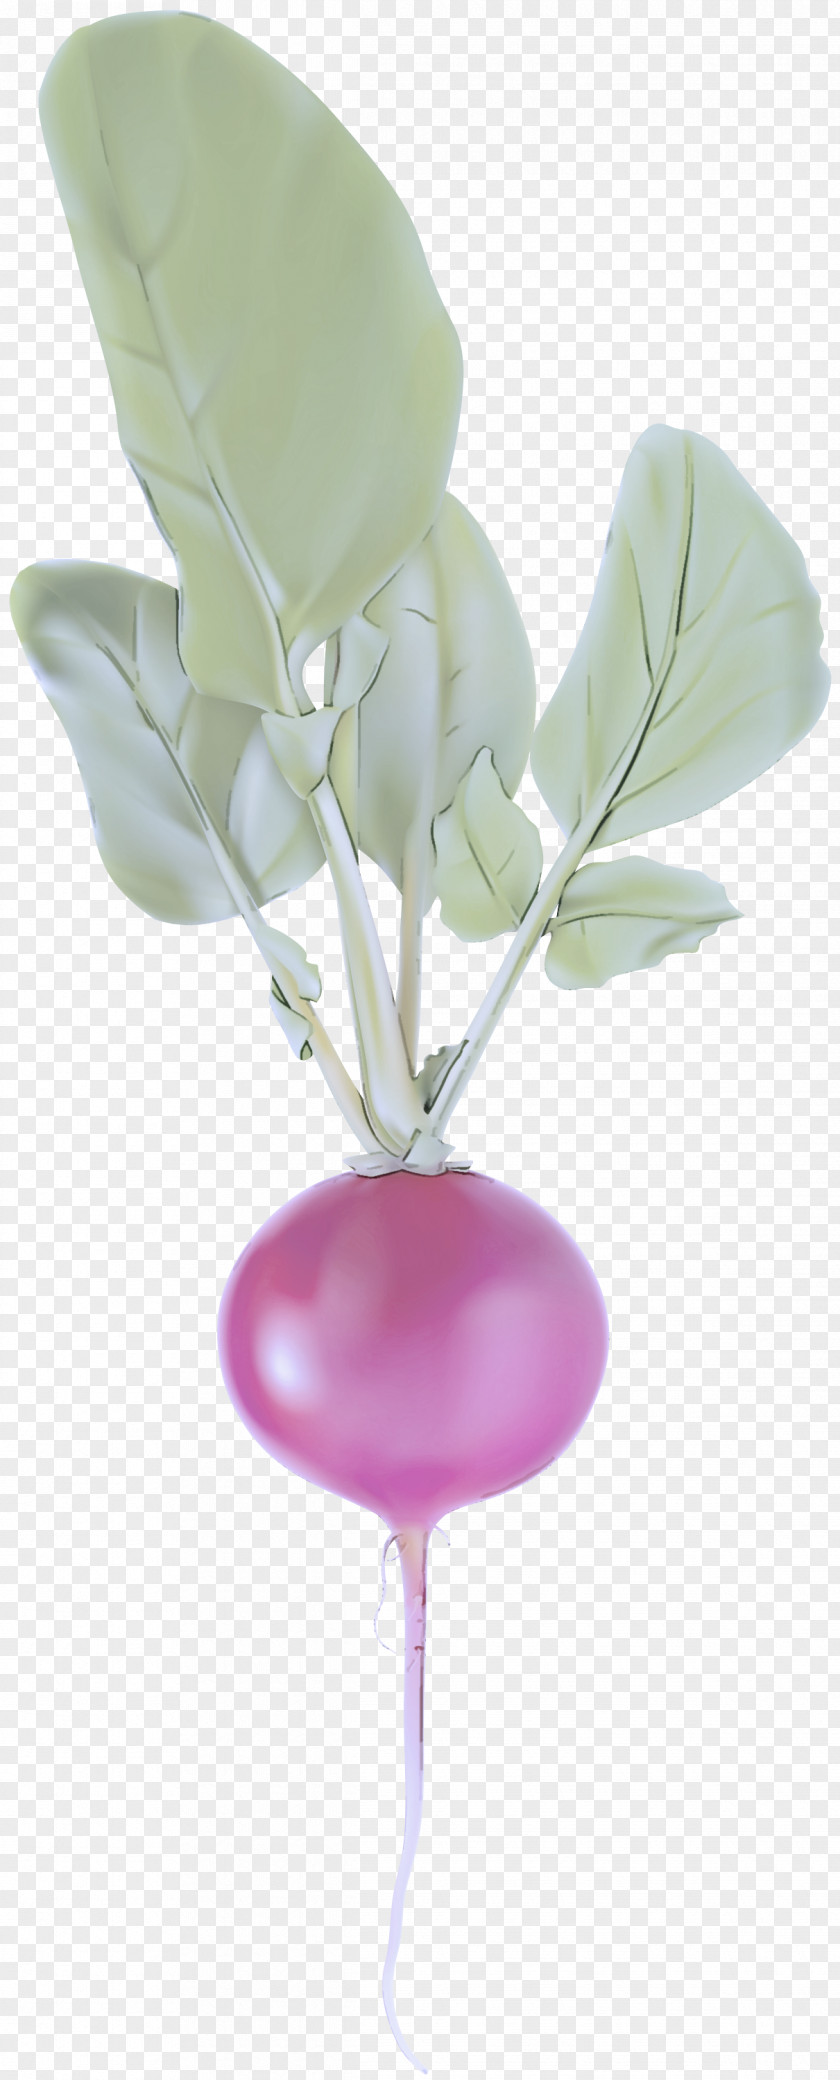 Pink Balloon Flower Plant Tulip PNG